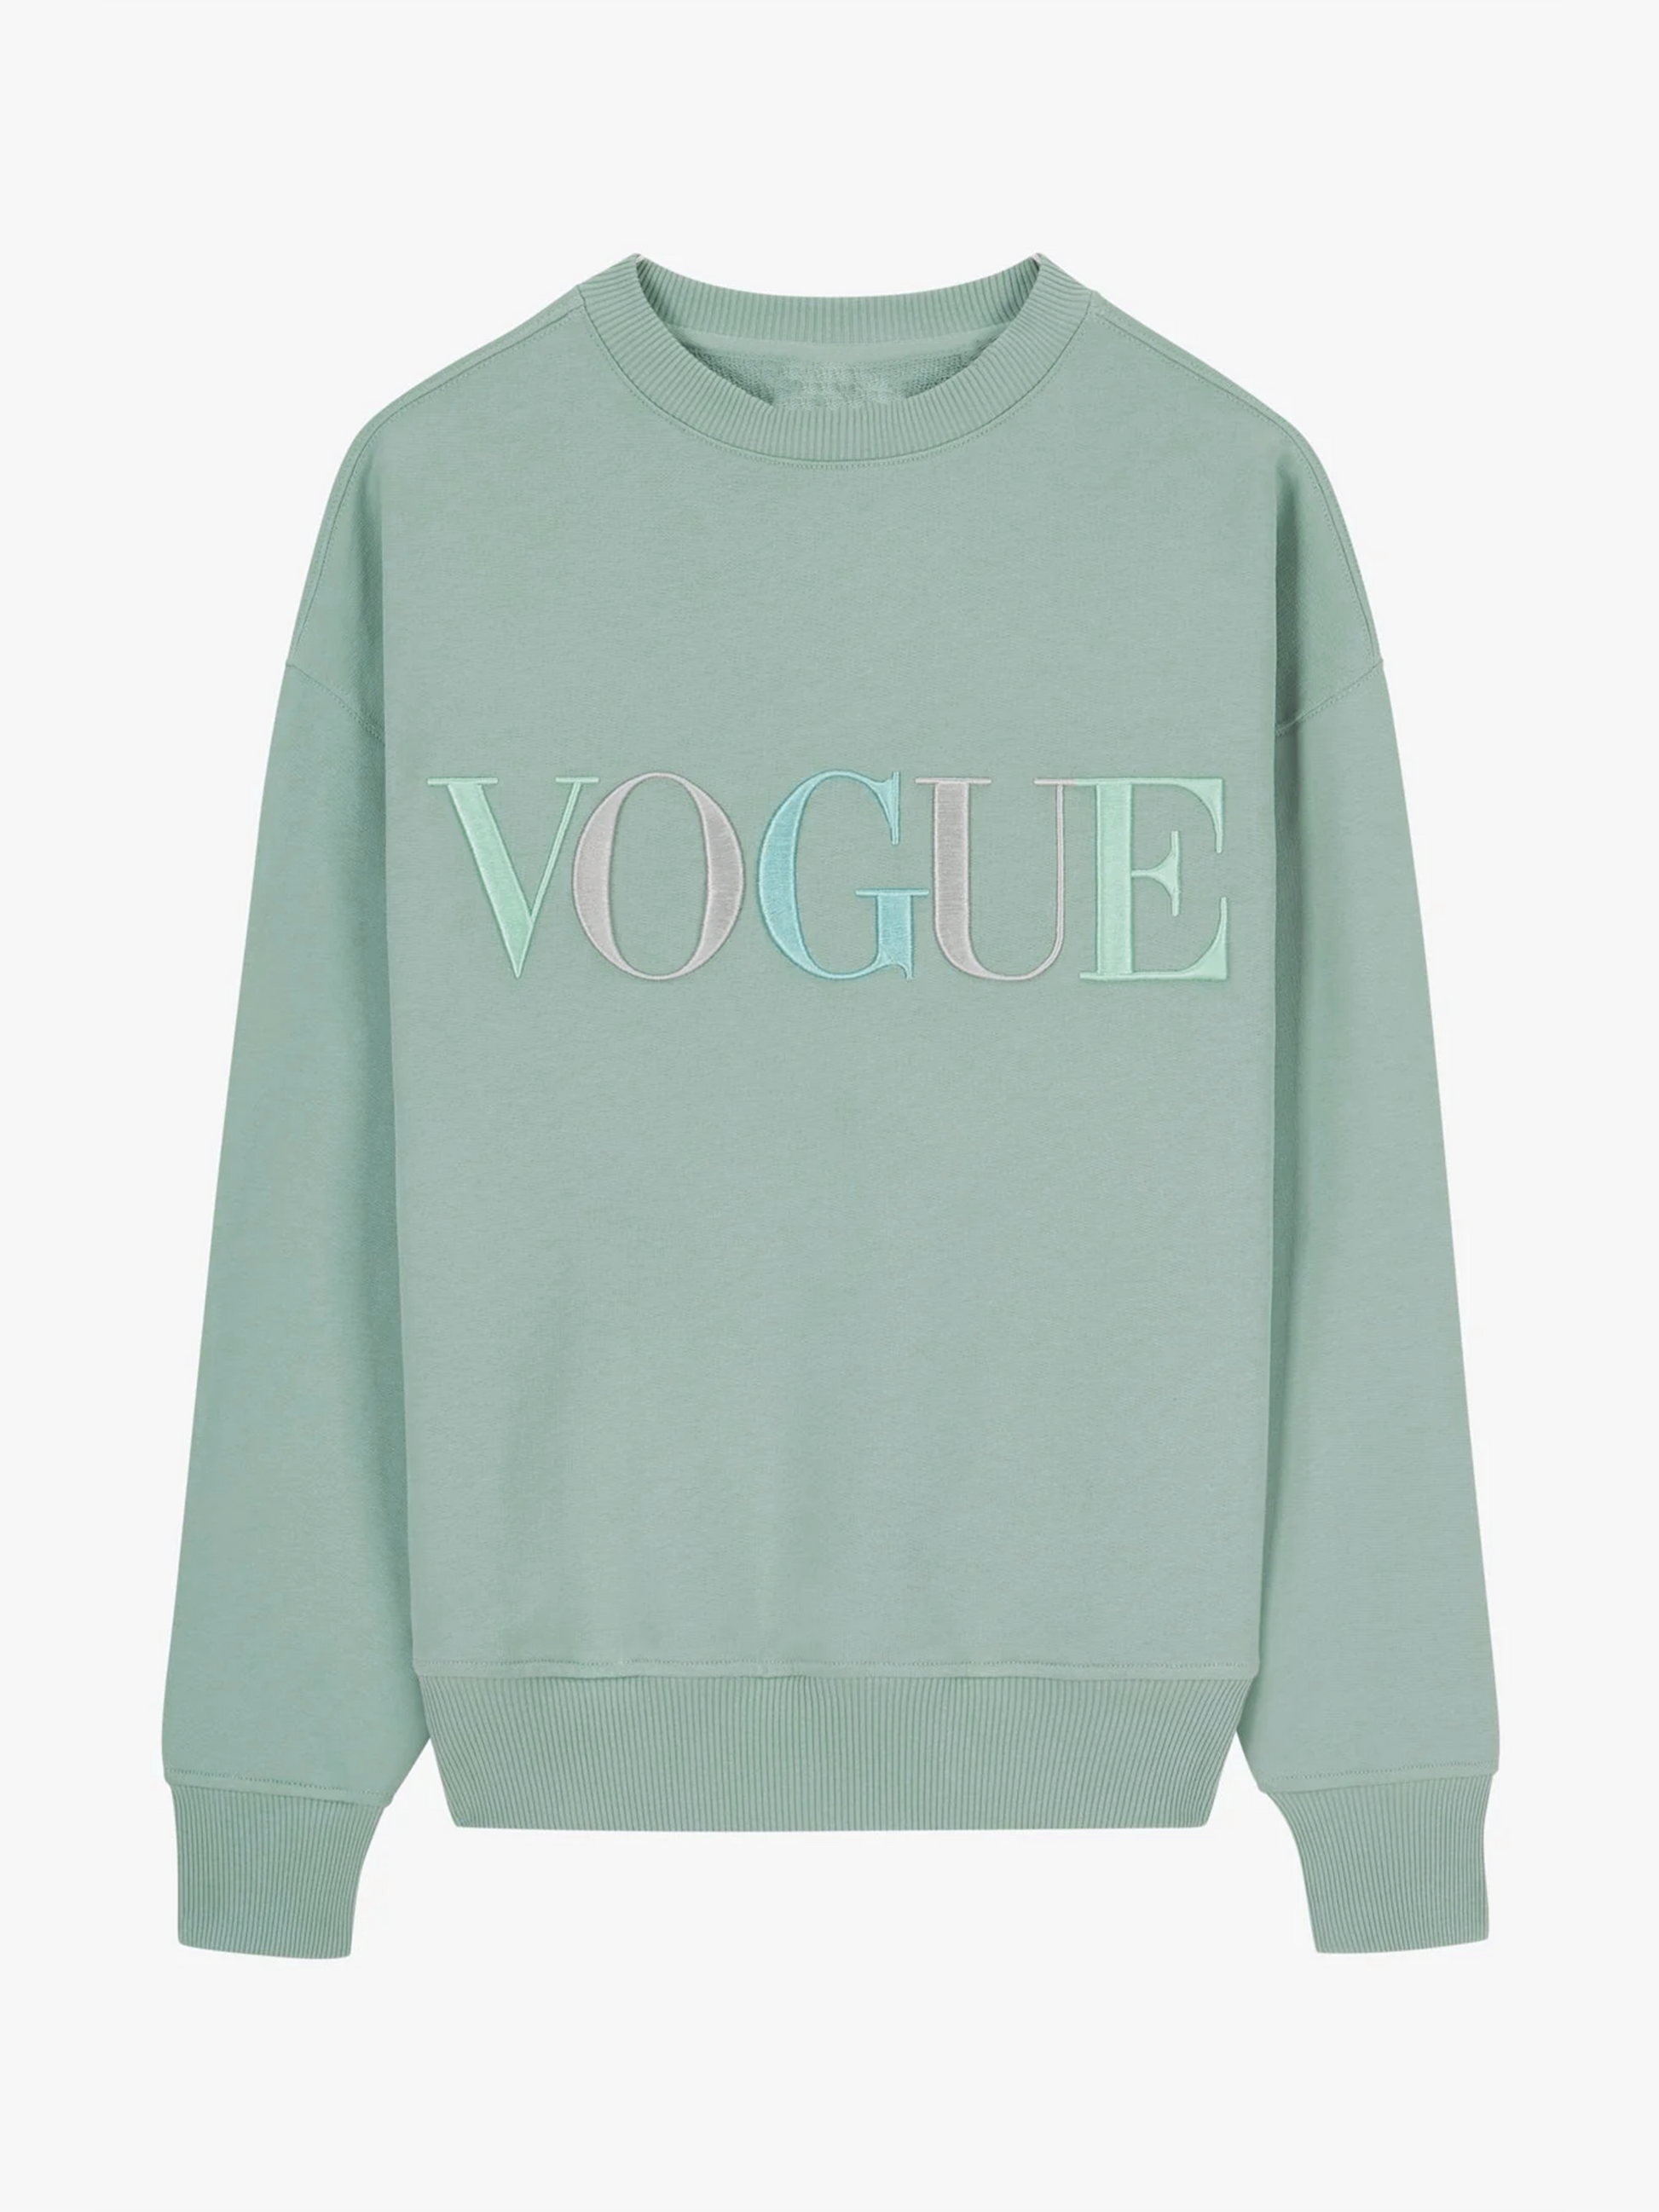 In Style Pastel Rainbow Embroidered Sweatshirt - Out The Purse UK